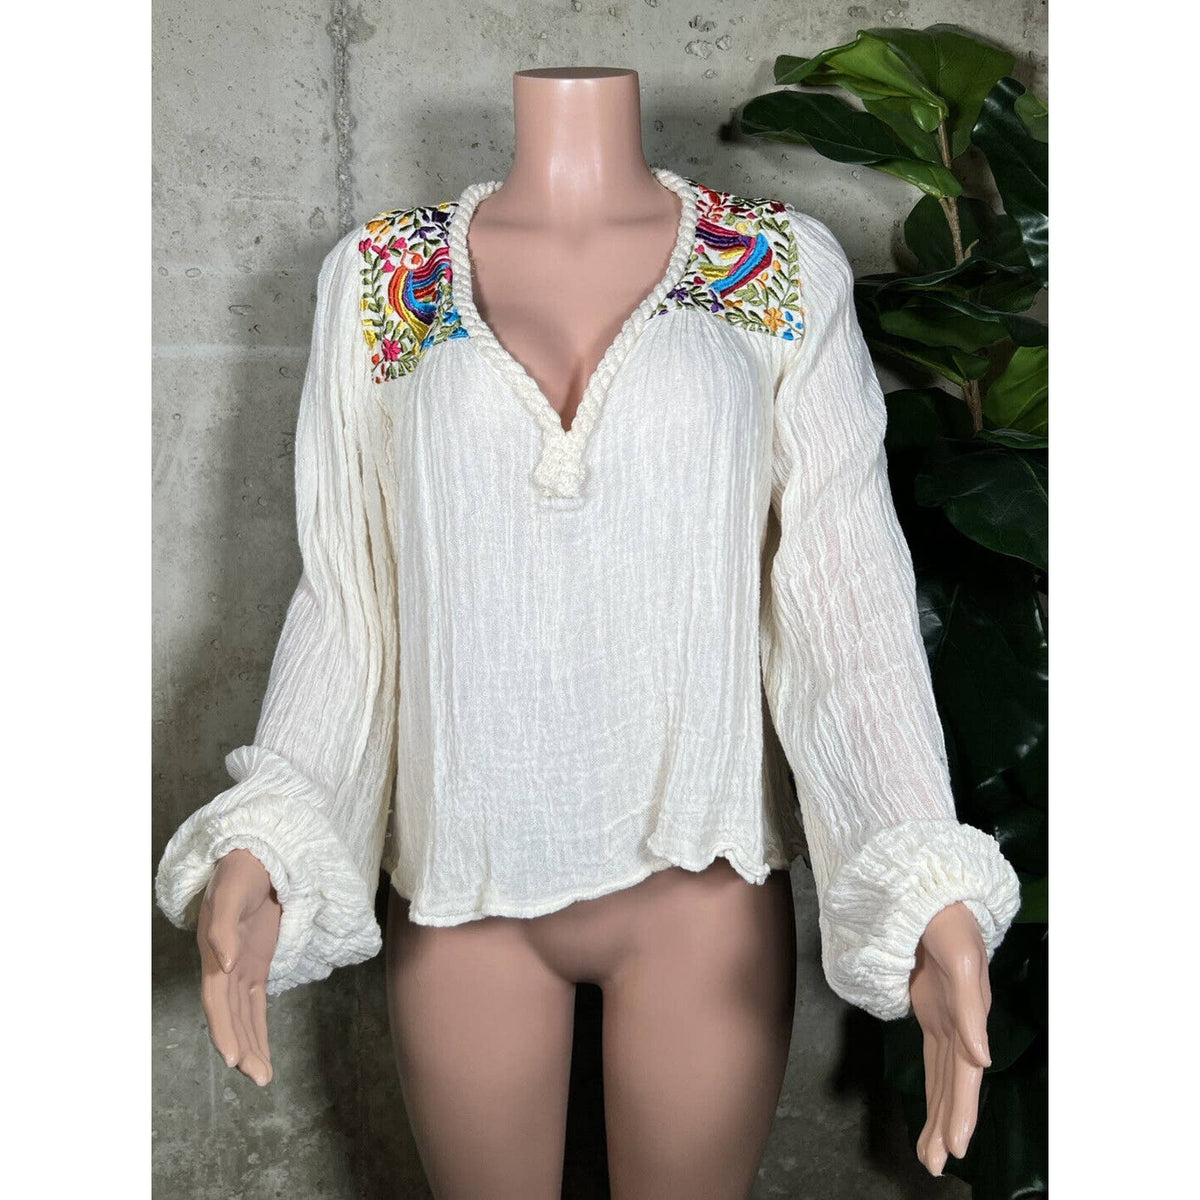 Jens Pirate Booty V-Neck Embroidered Blouse Sz.P/S